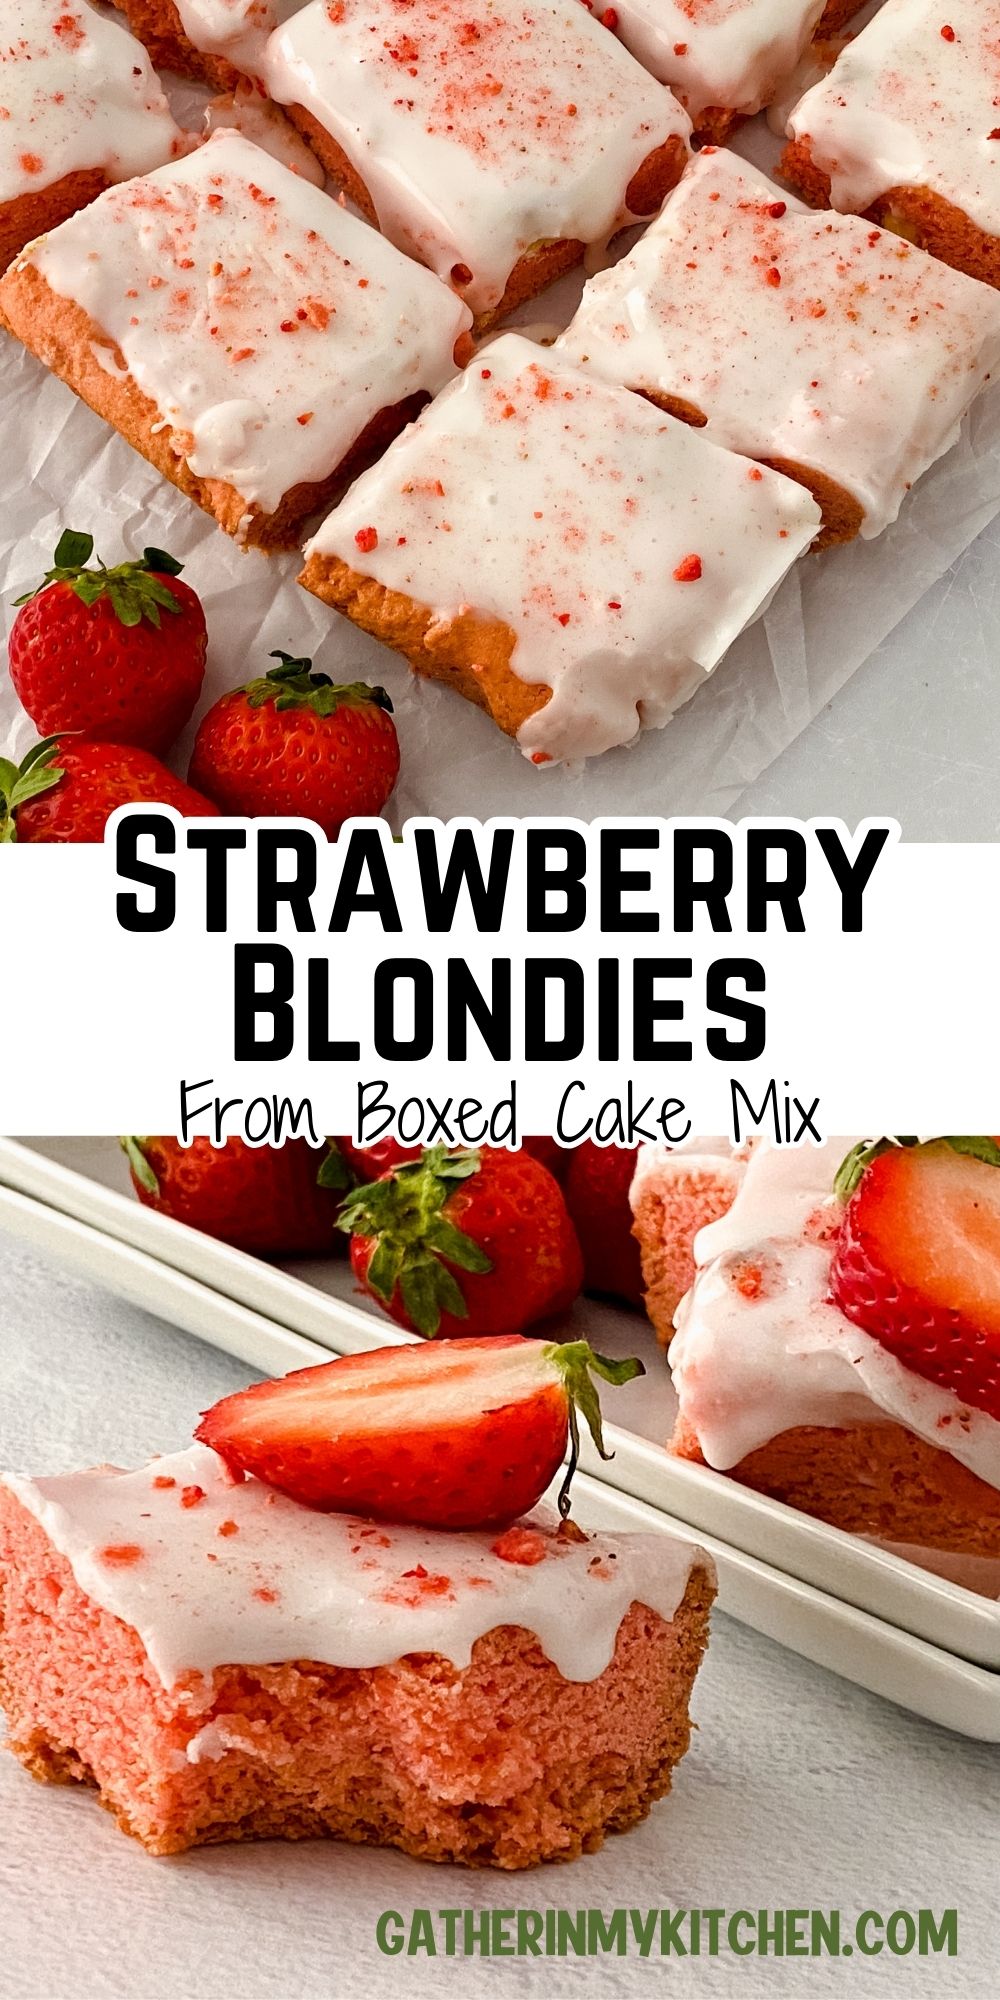 Pin image: top and bottom are images of strawberry blondies and middle says "Strawberry Blondies from boxed cake mix".